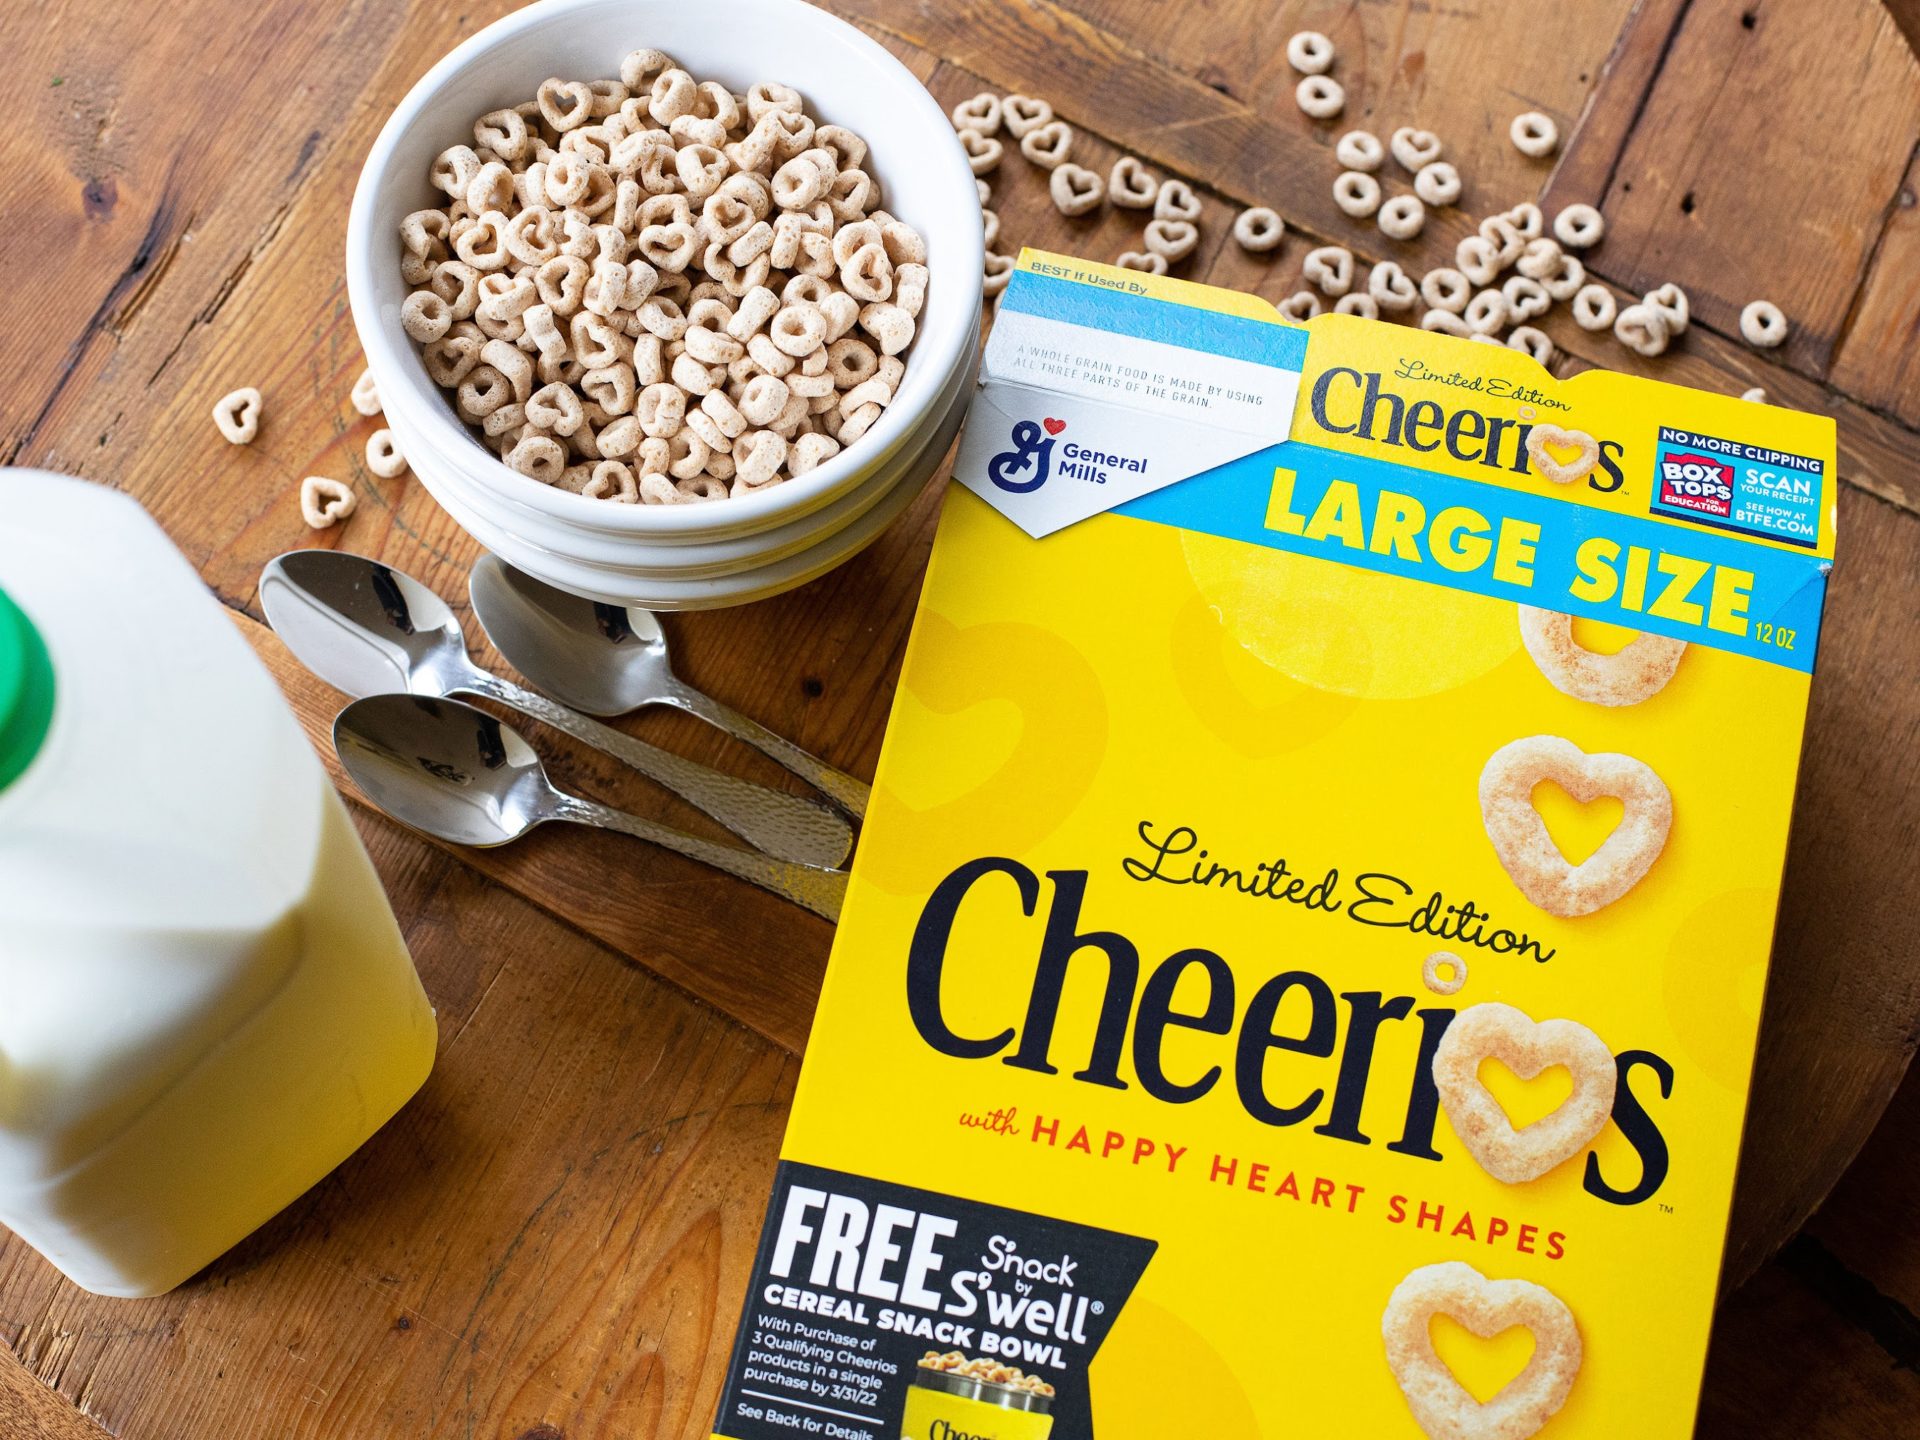 Large Size Boxes Of General Mills Cheerios Cereal Just $1.99 At Kroger